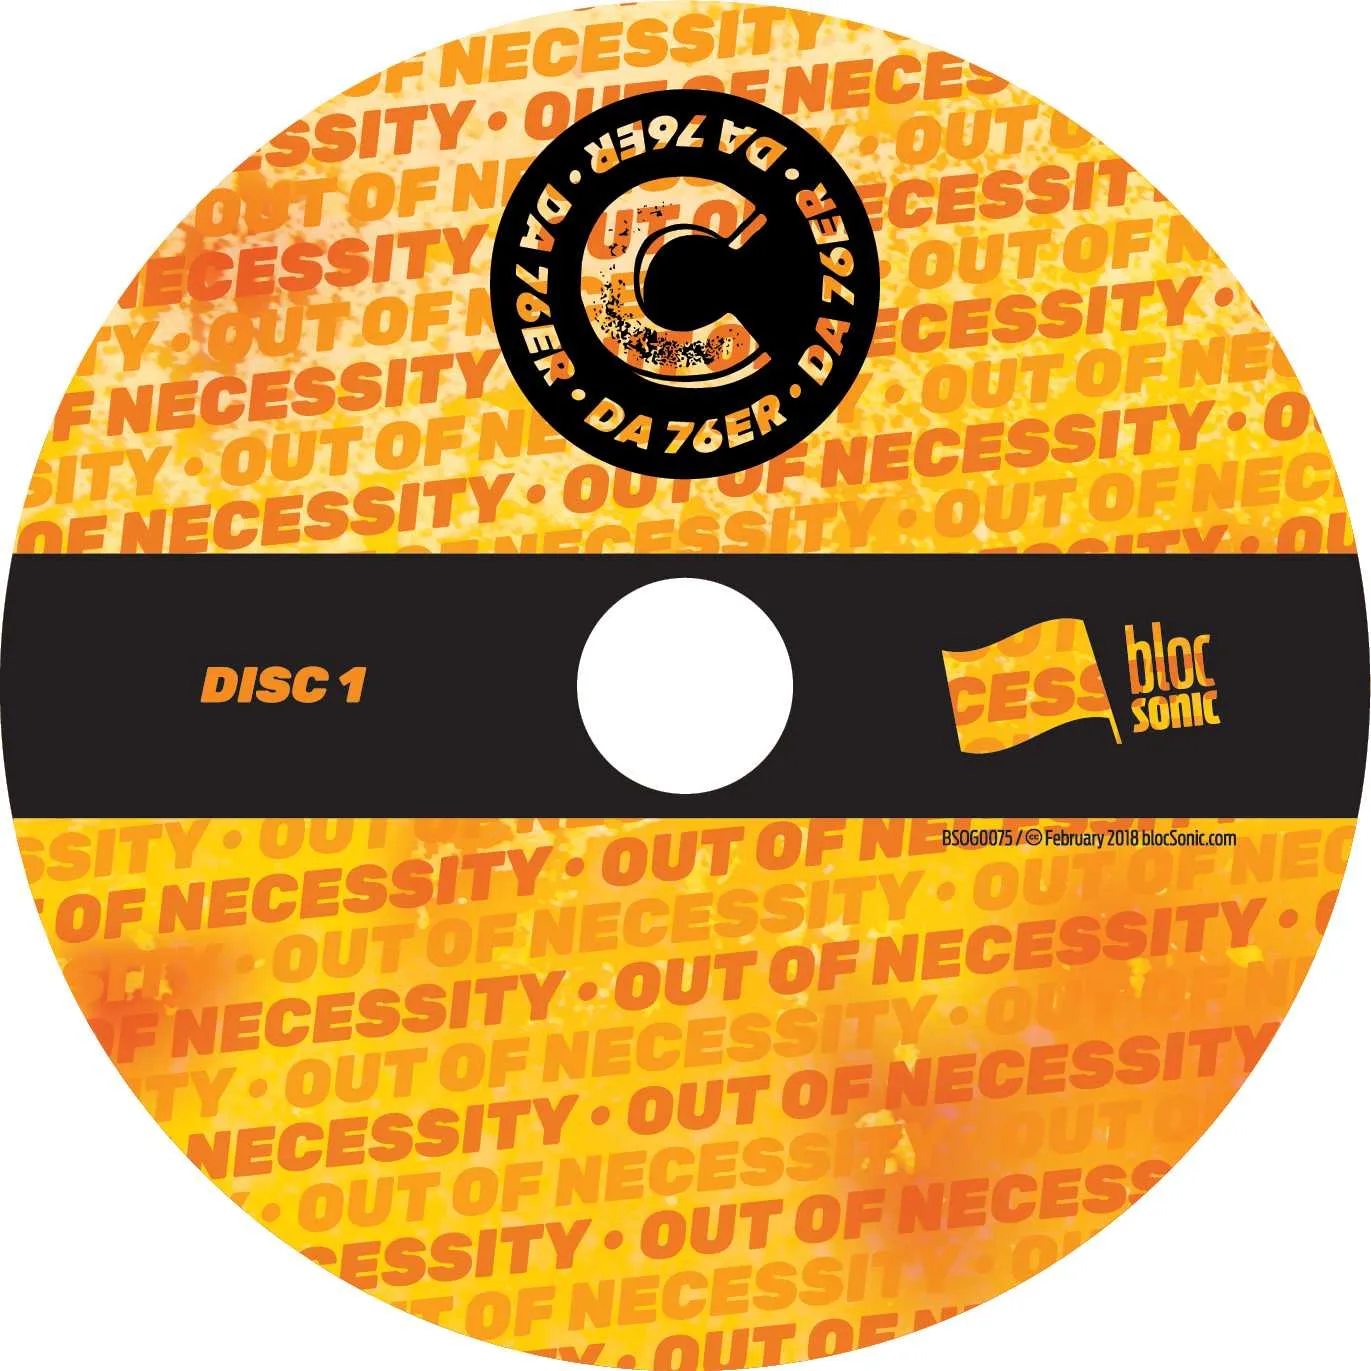 Album disc for “Out of Necessity” by C da 76er